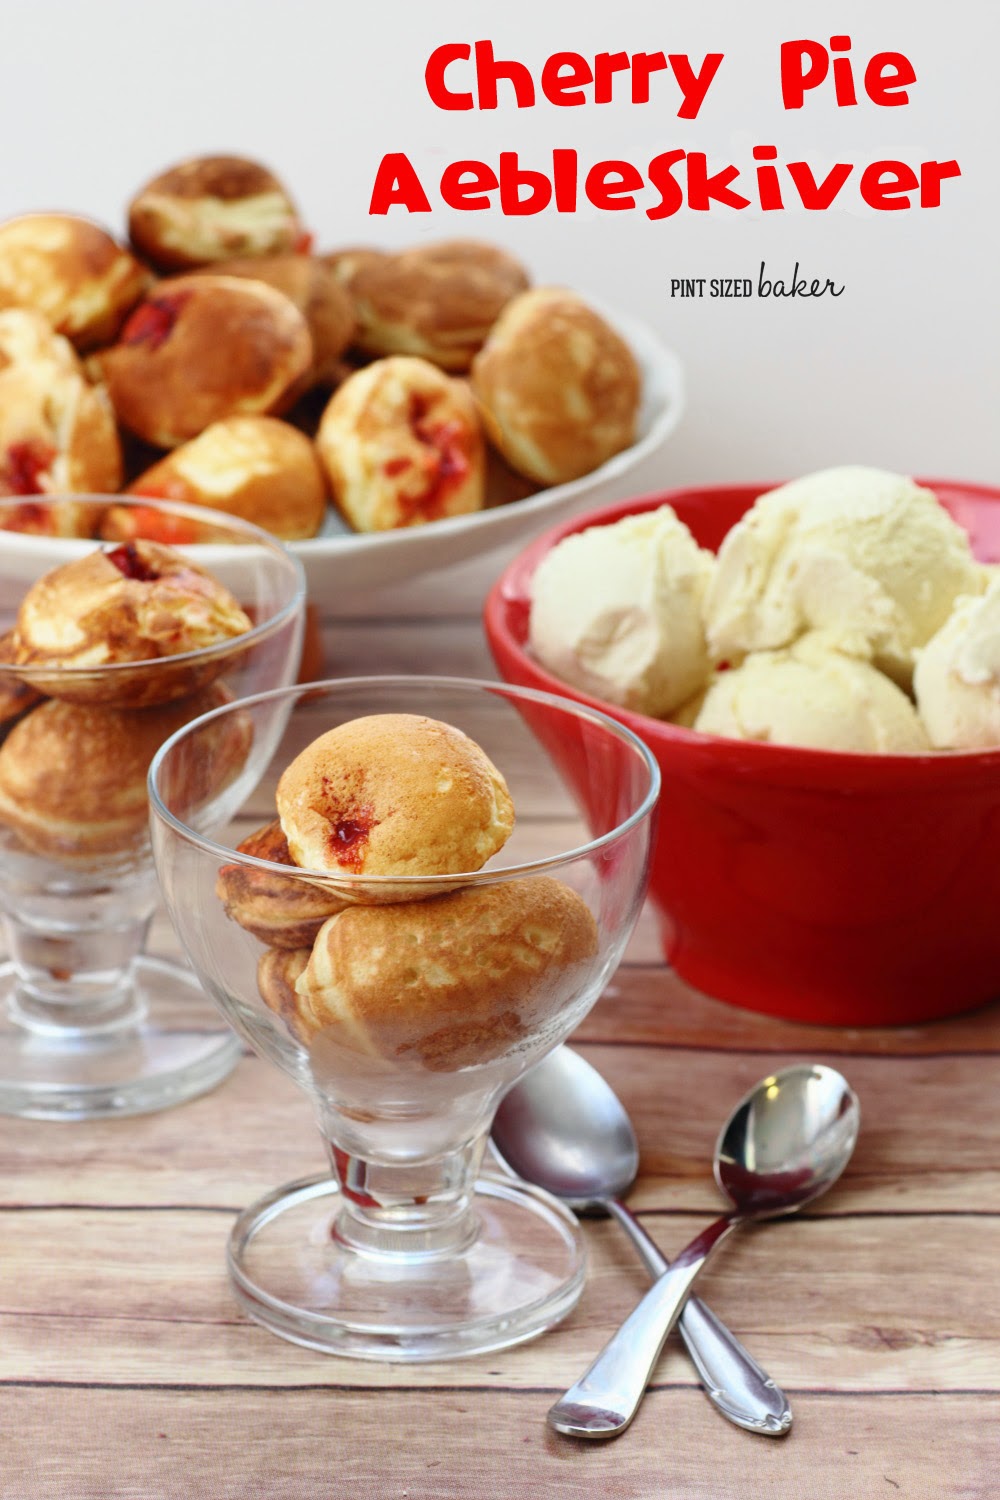 Cherry Pie Aebleskiver - Danish Pancake Puffs filled with a cherry center and then topped with ice cream!